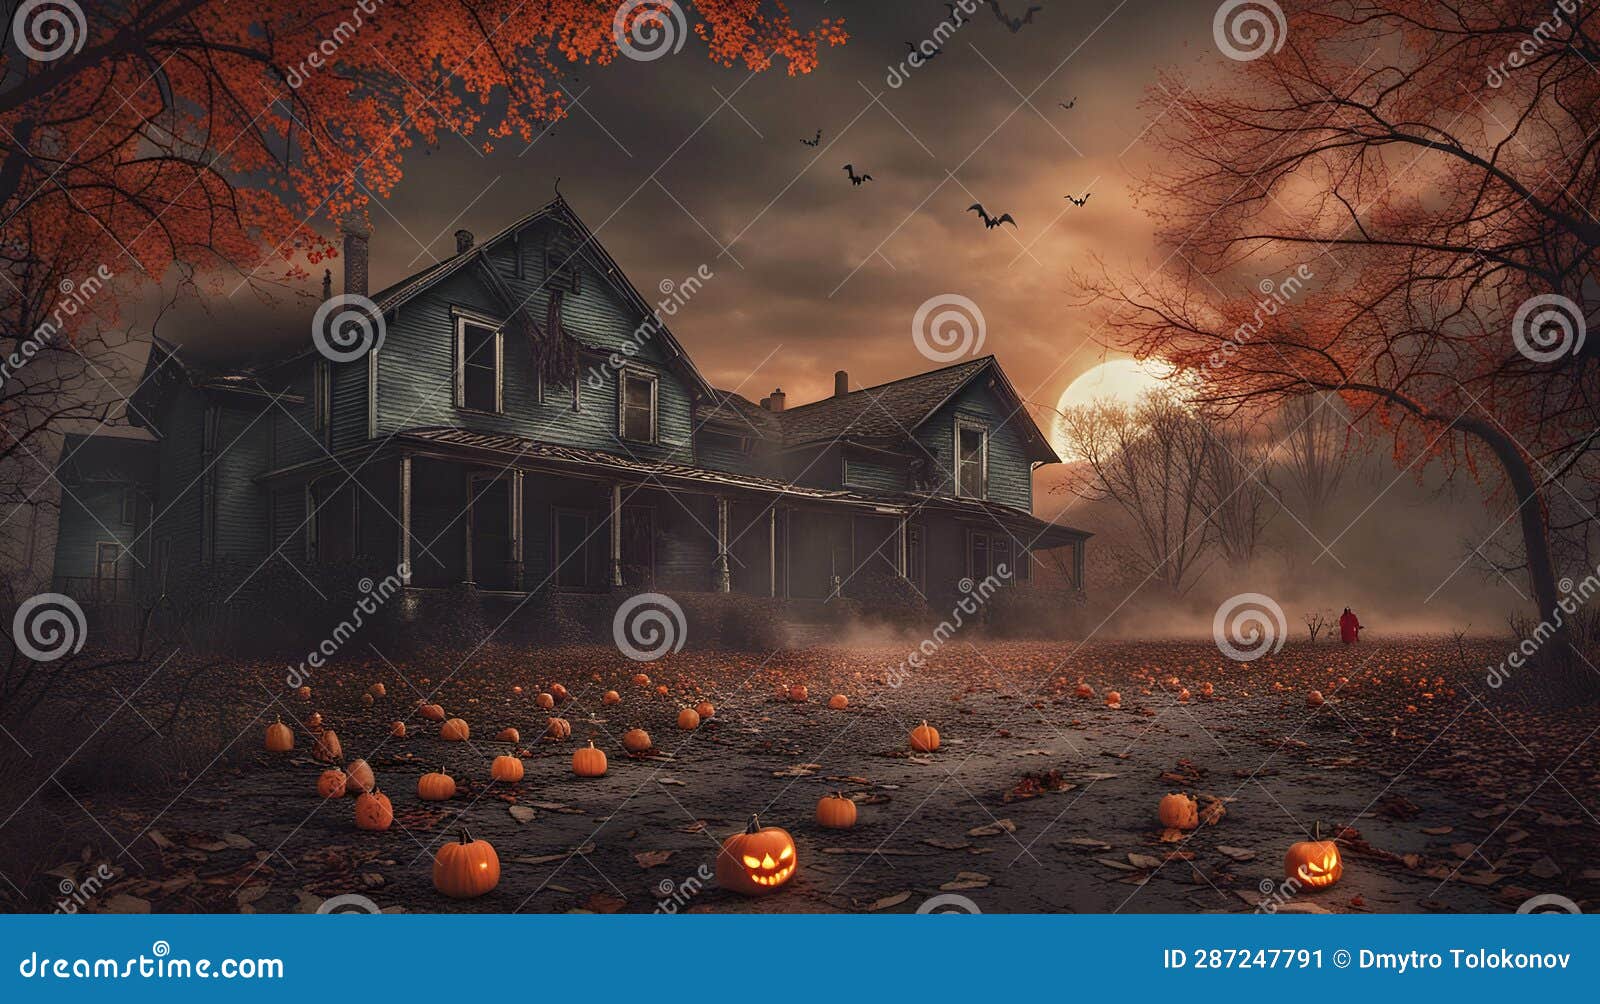 romero movies styled halloween greetings card with abandoned house, bat and pumpkins